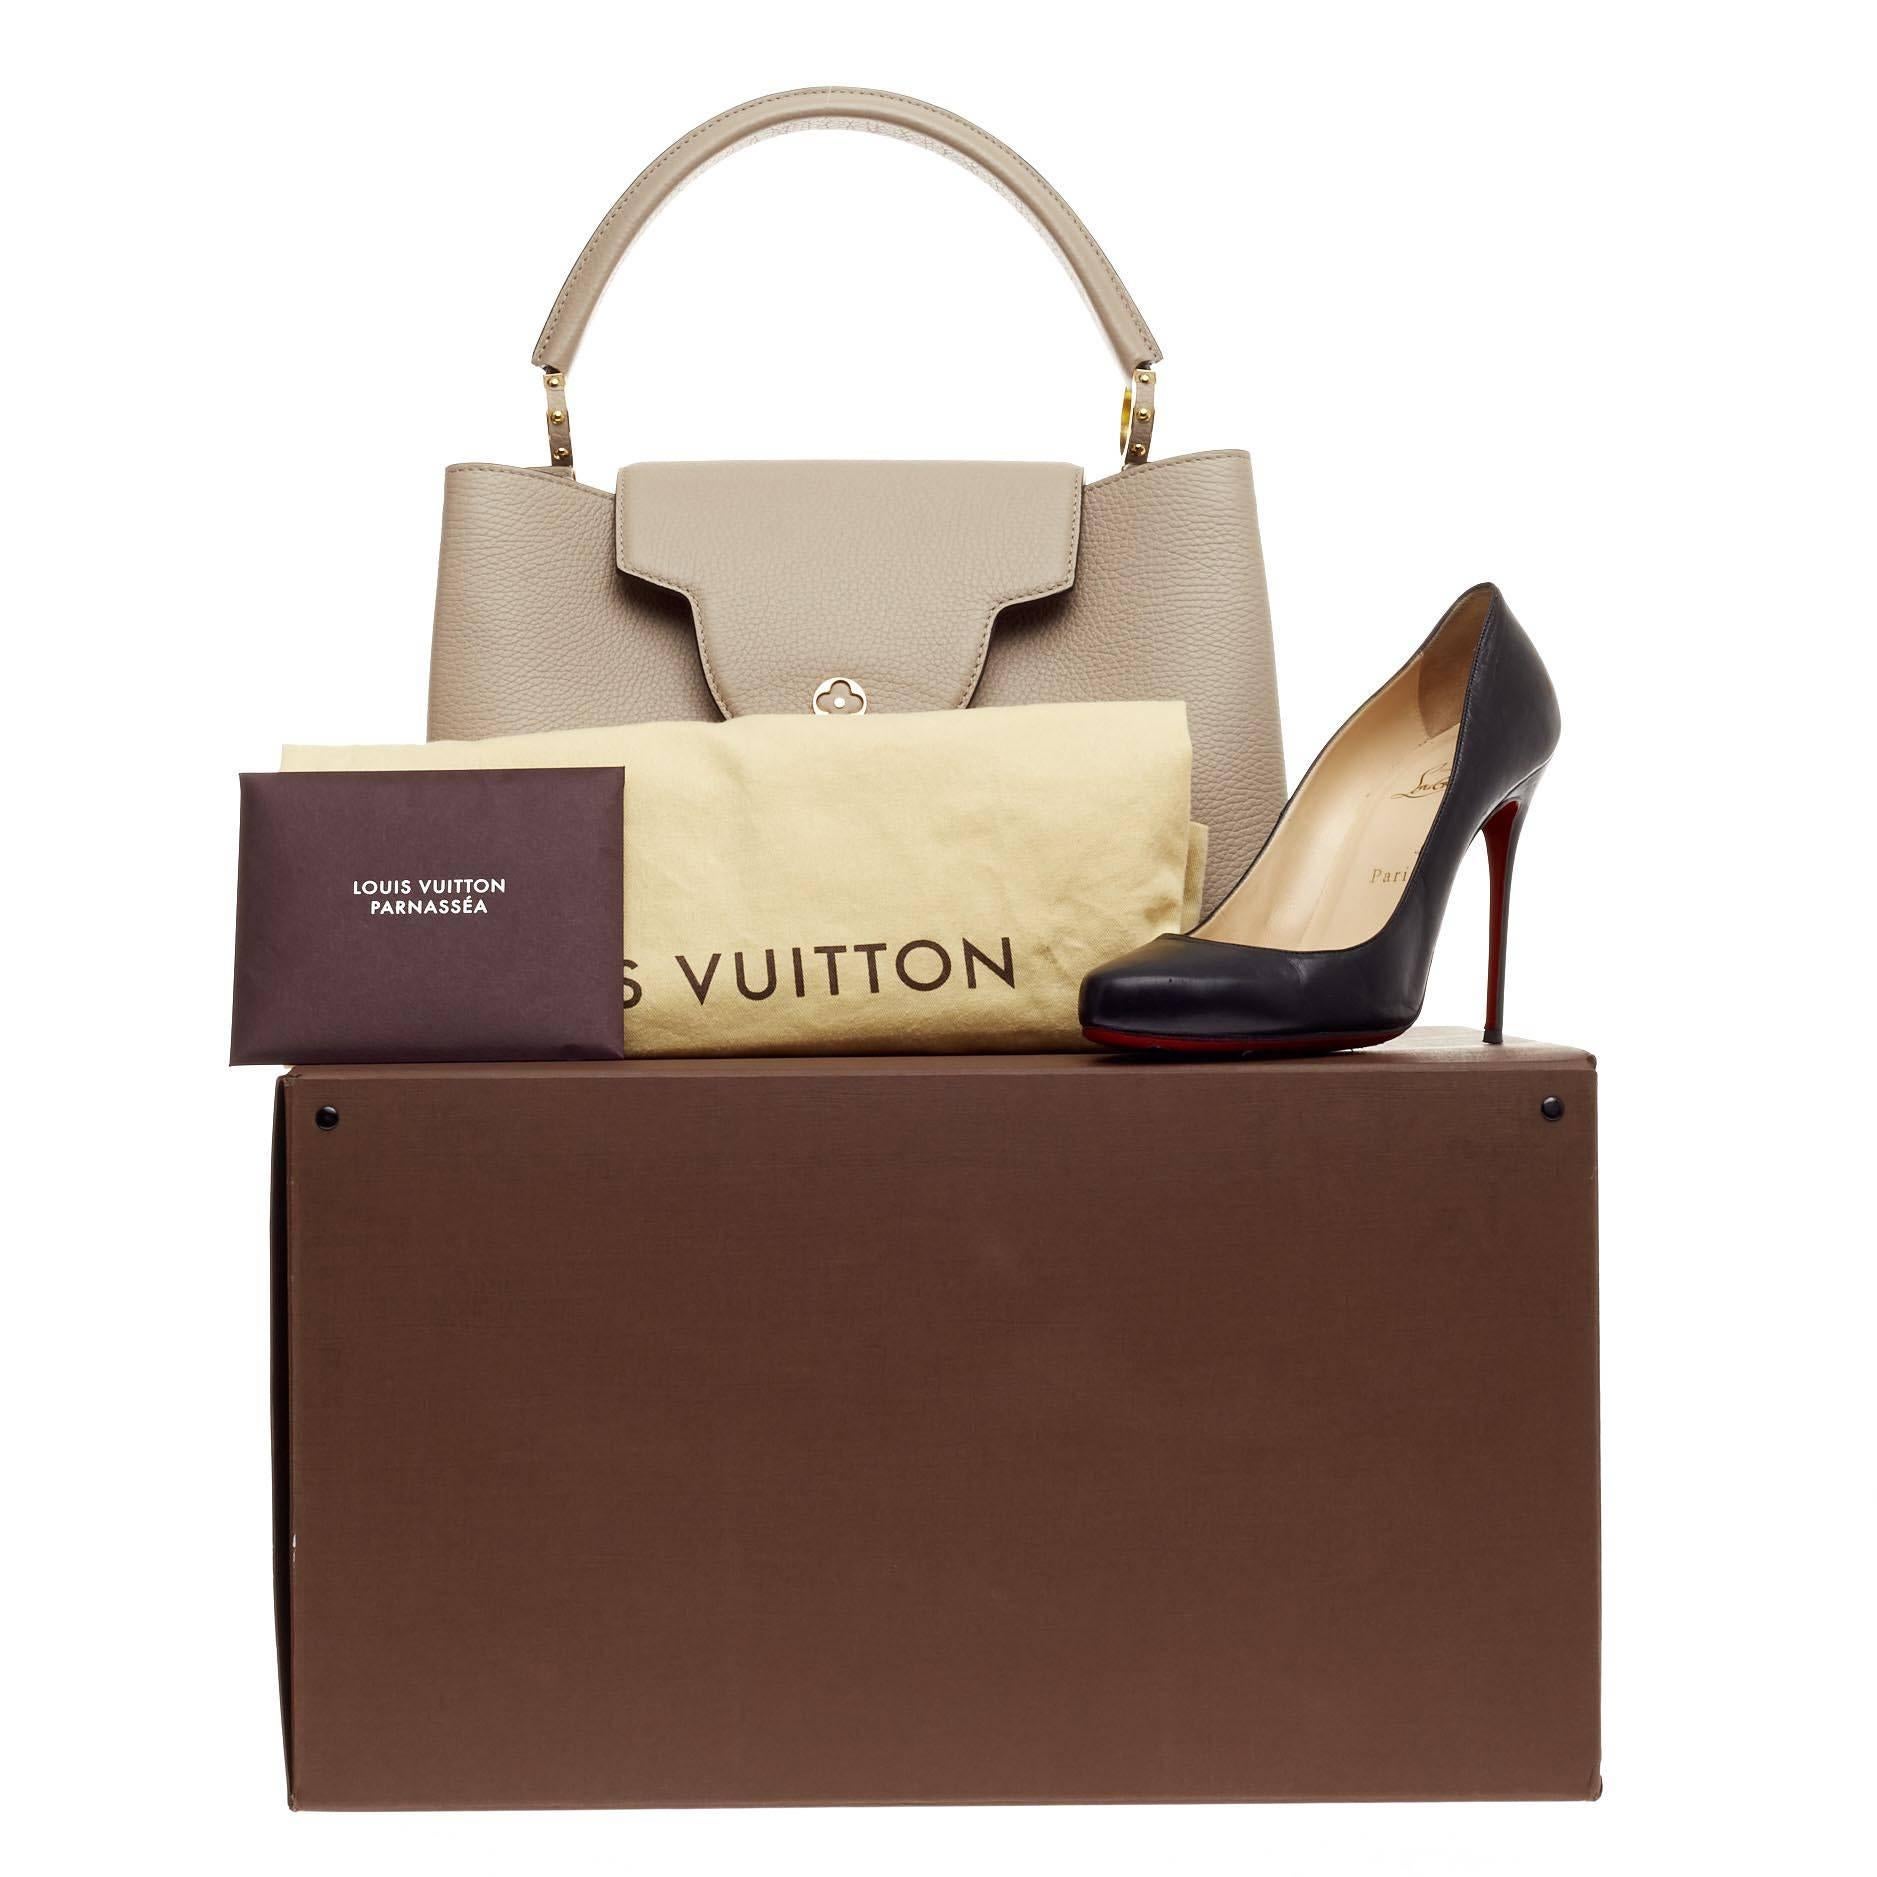 This authentic Louis Vuitton Capucines Leather MM is sophisticated and ladylike luxurious bag from the brand's Fall 2013 Collection inspired by its Parisian heritage. Crafted in galet beige taurillion leather, this chic, stand-out bag features a